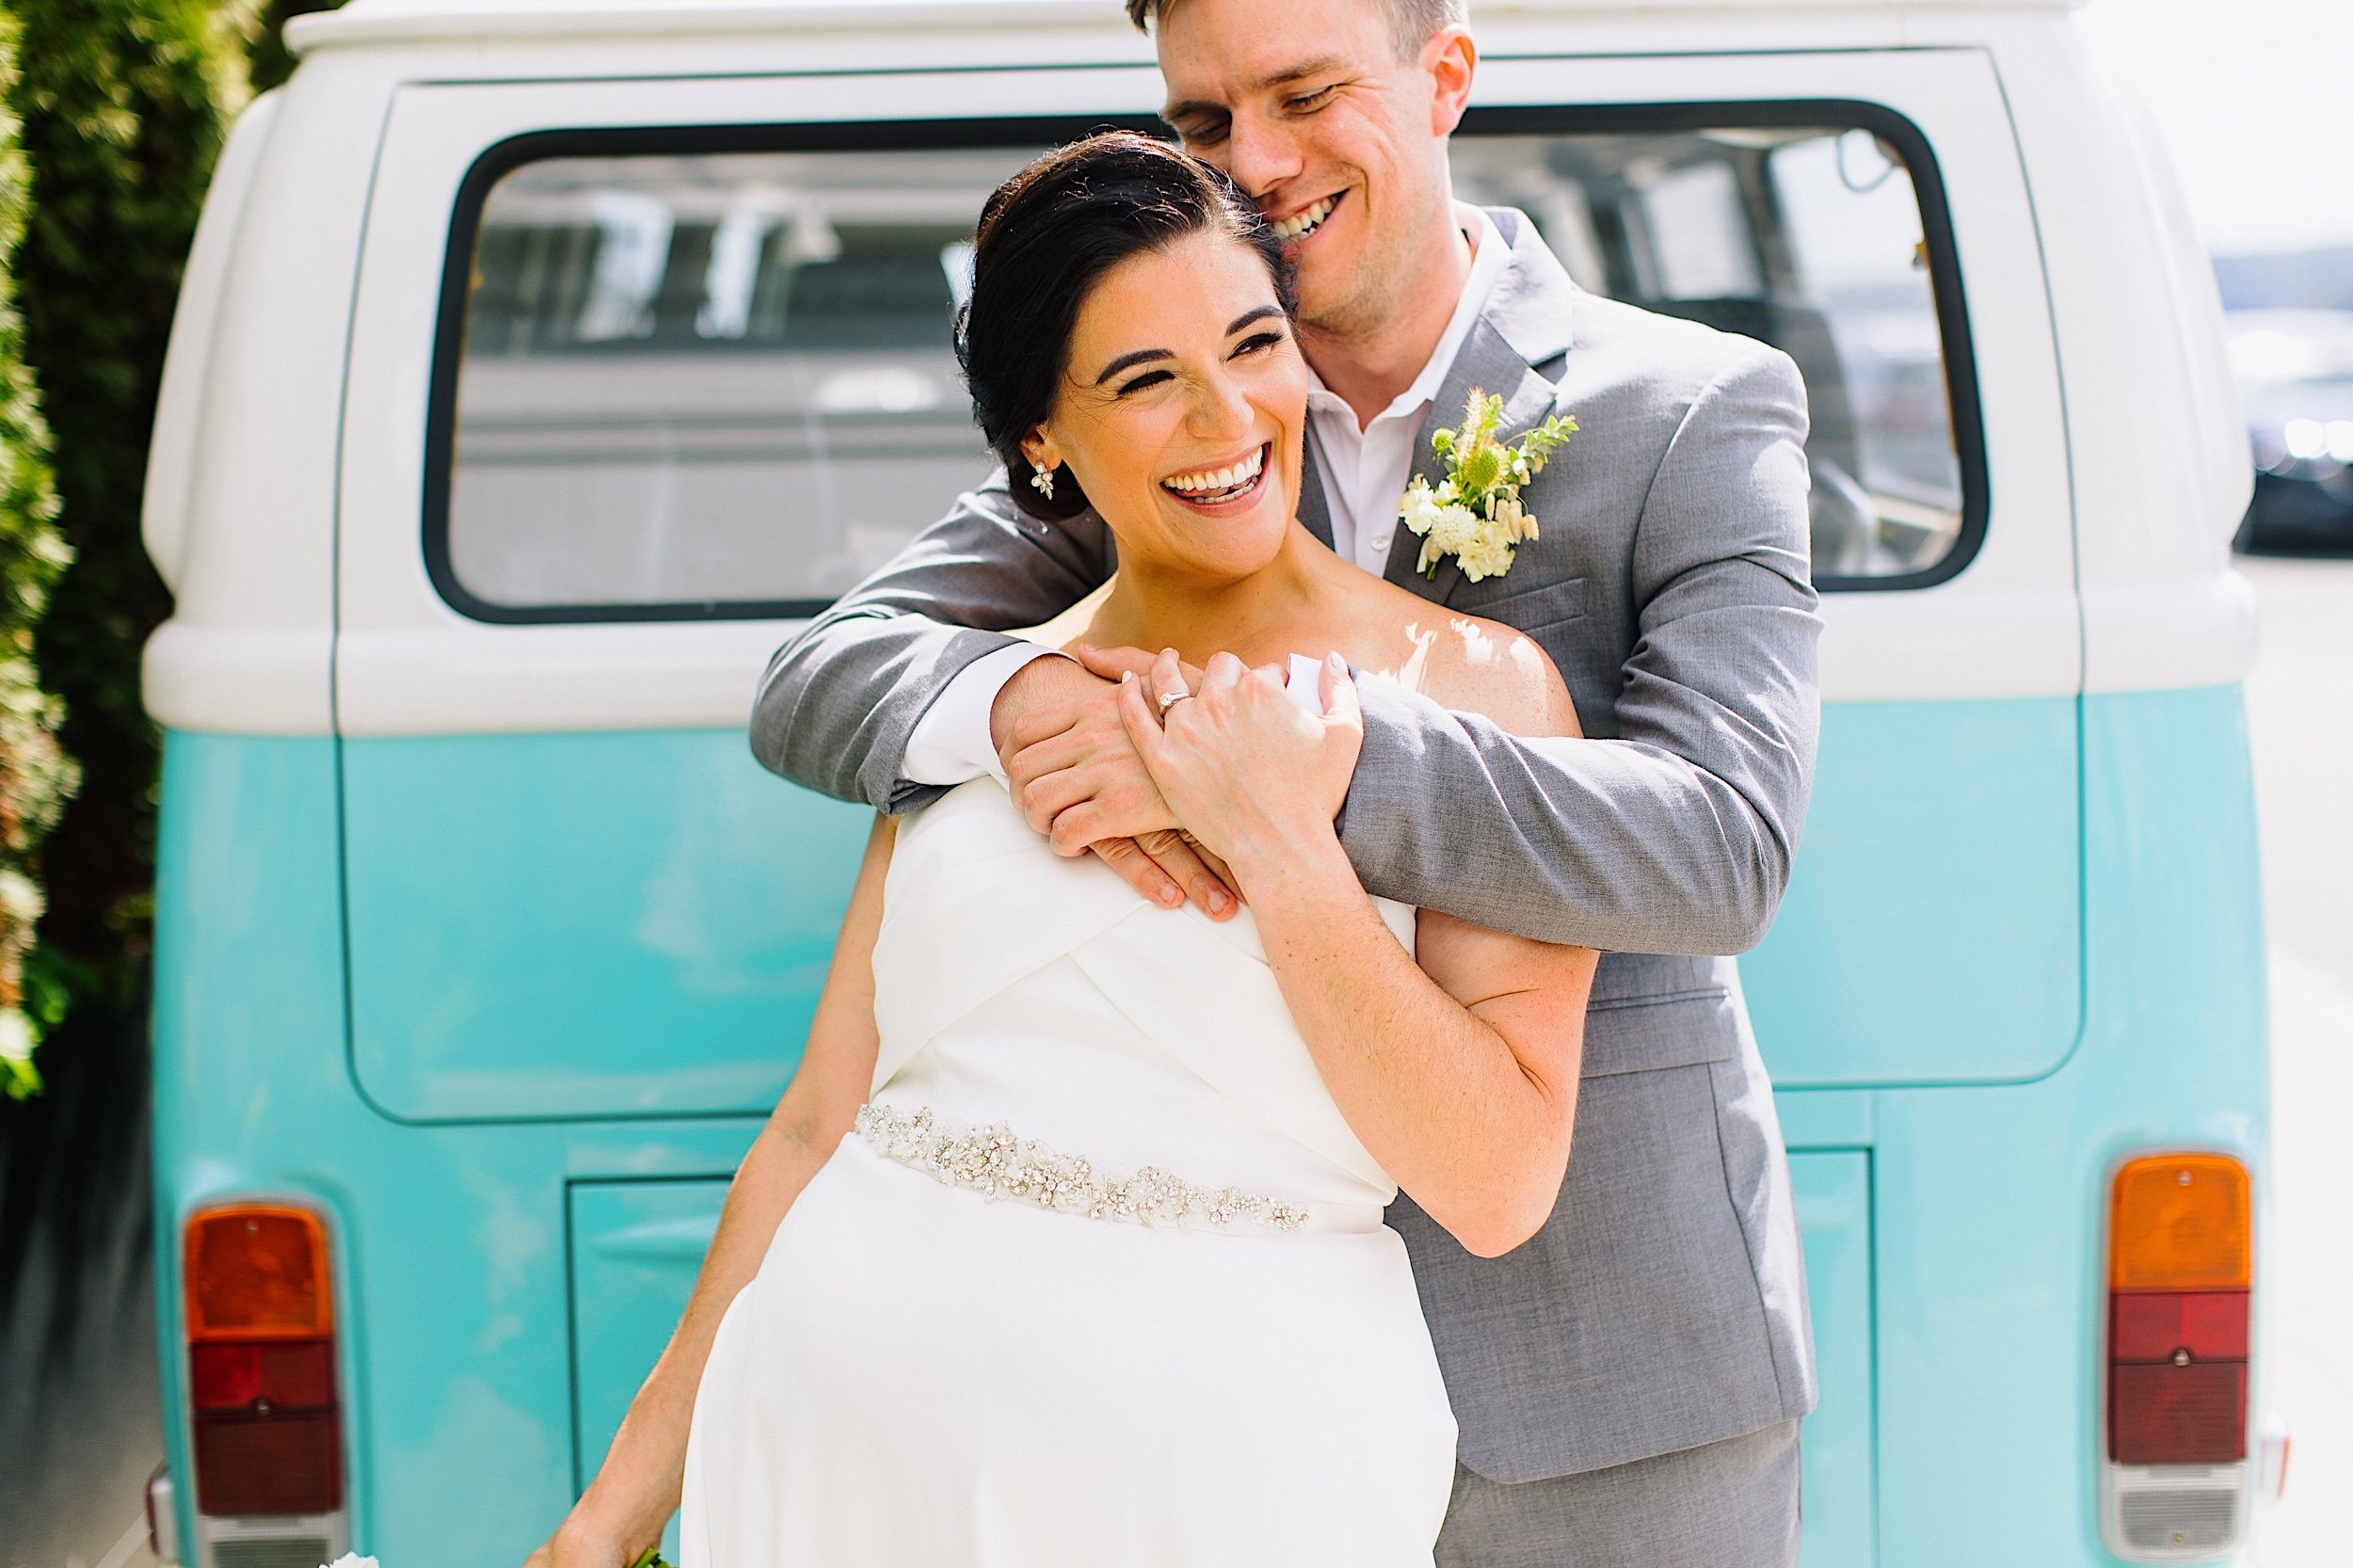 053-ZacWolfPhotography-20220807-Blog_Bride-and-Groom-hugging-in-front-of-vintage-VW-bus.jpg